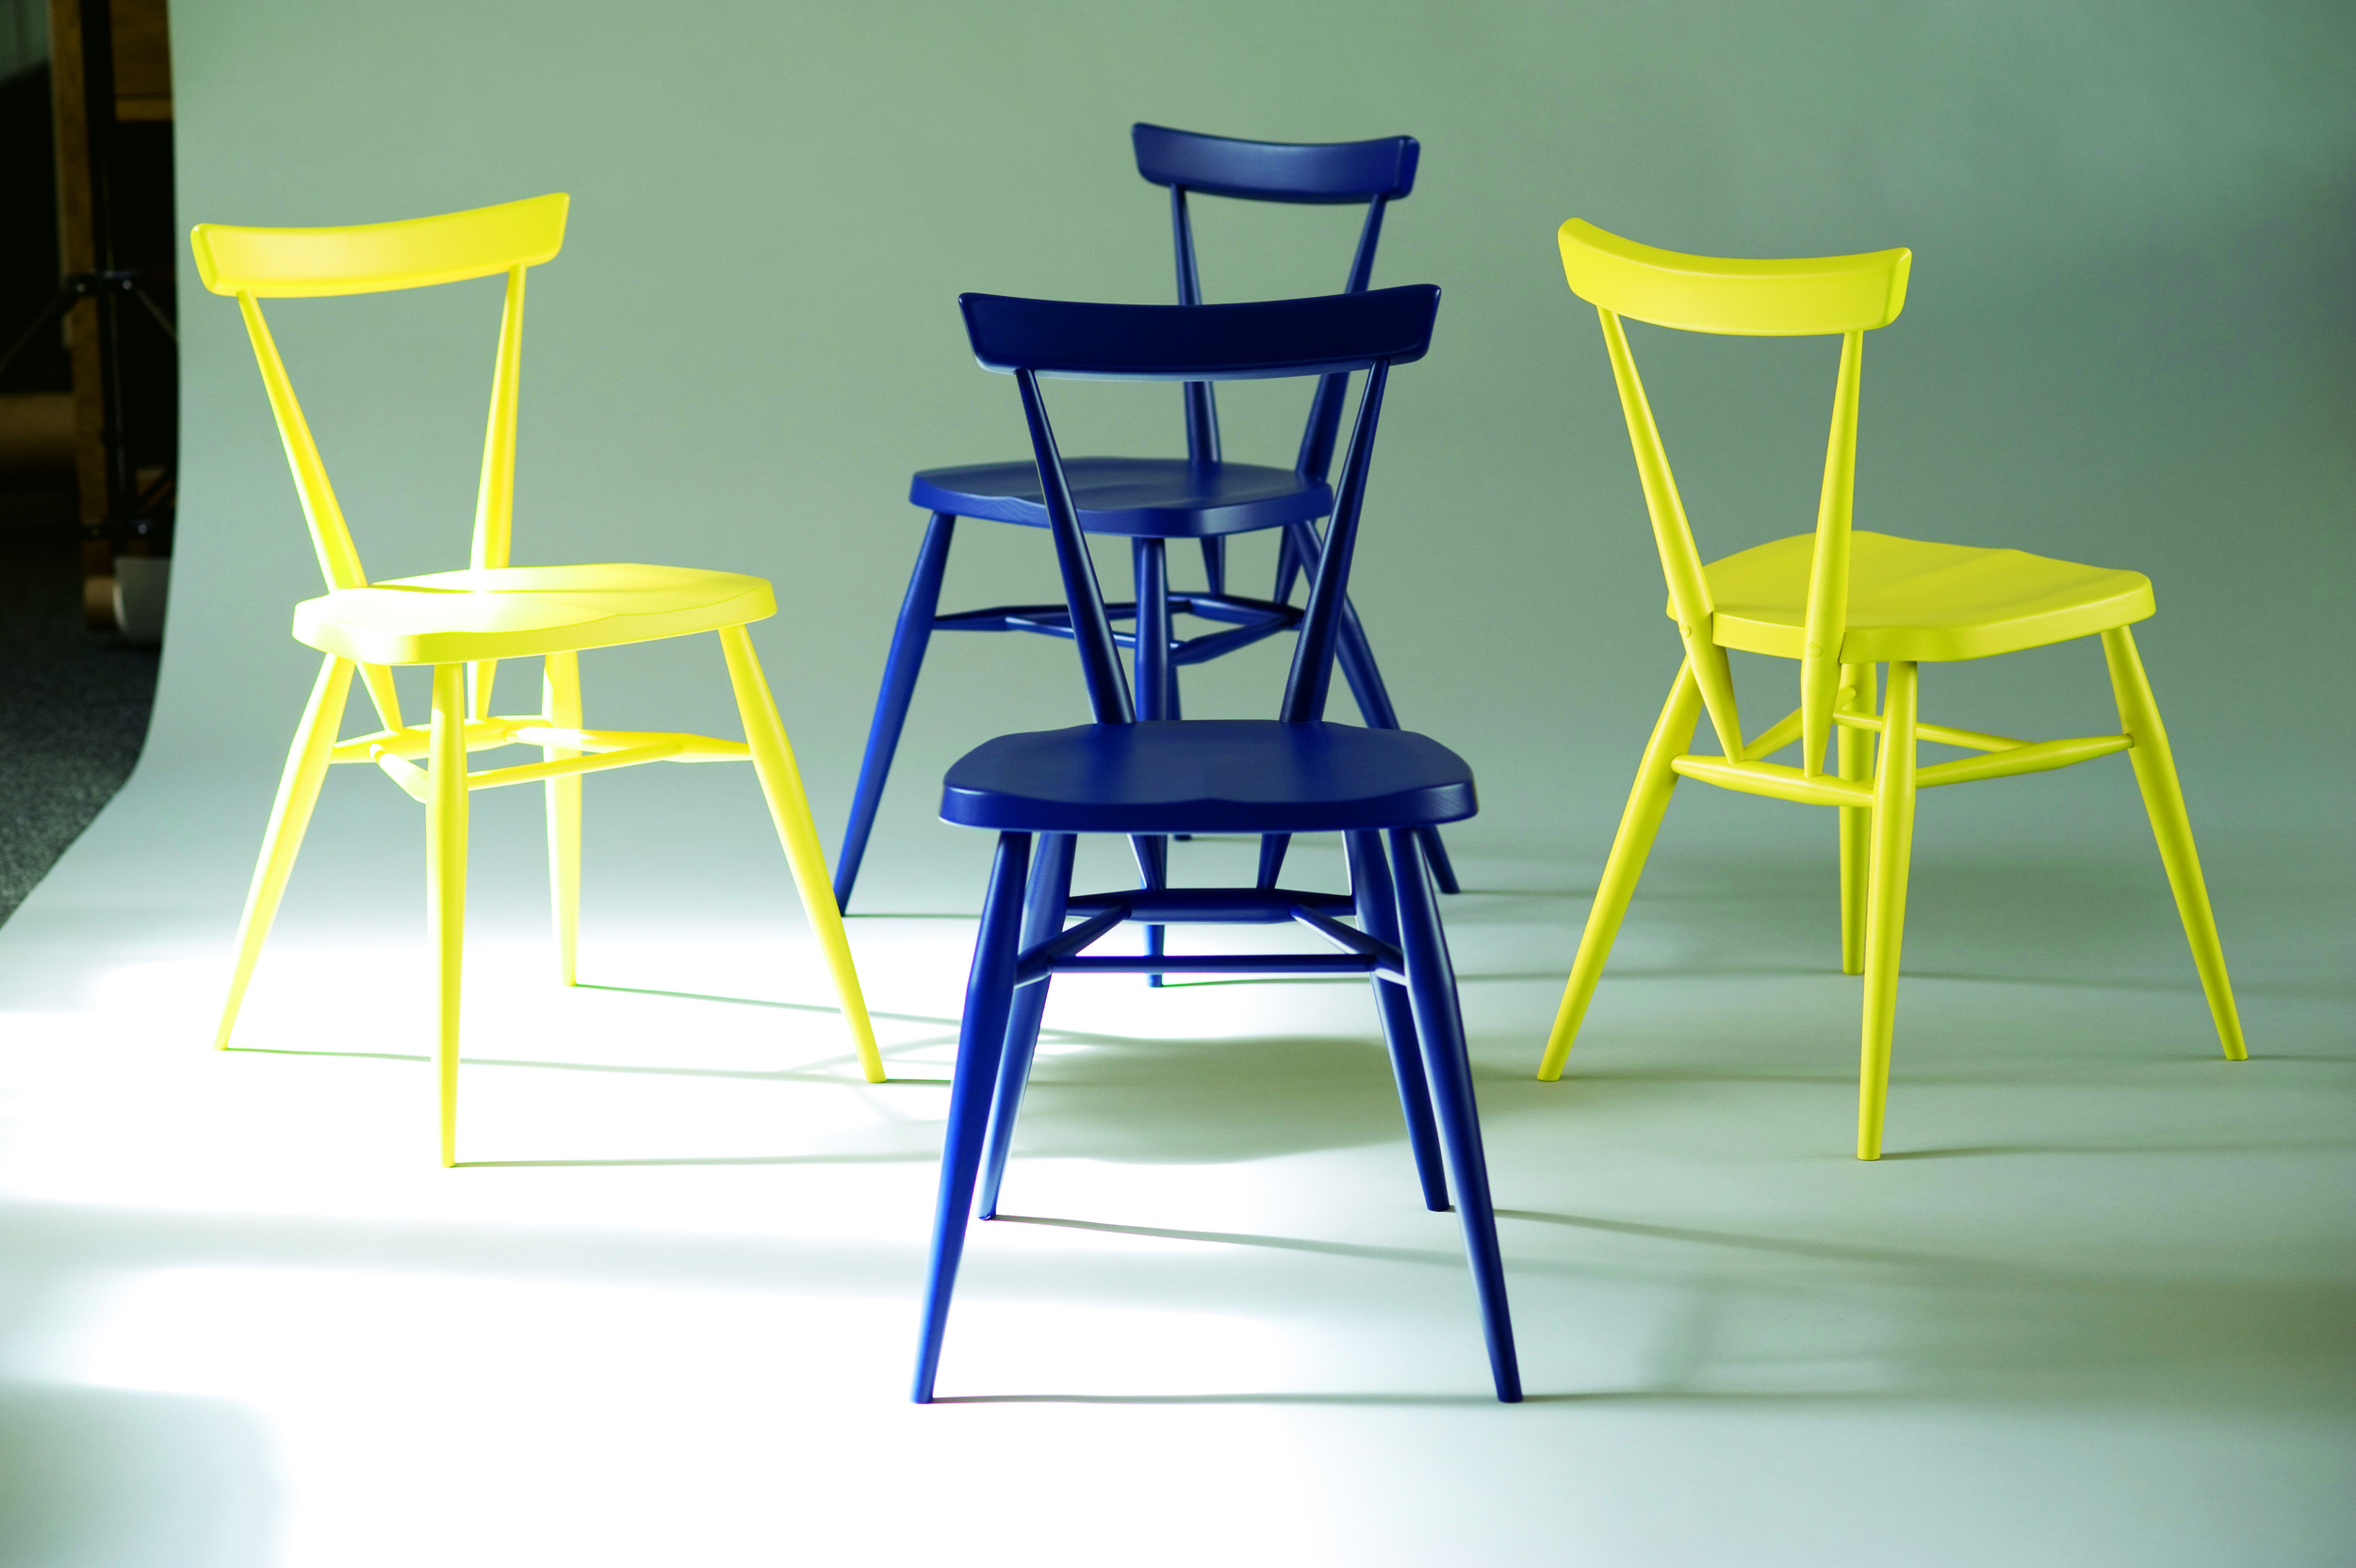 Ercol_stacking chairs model no 392_yellow and navy_new colors.jpg